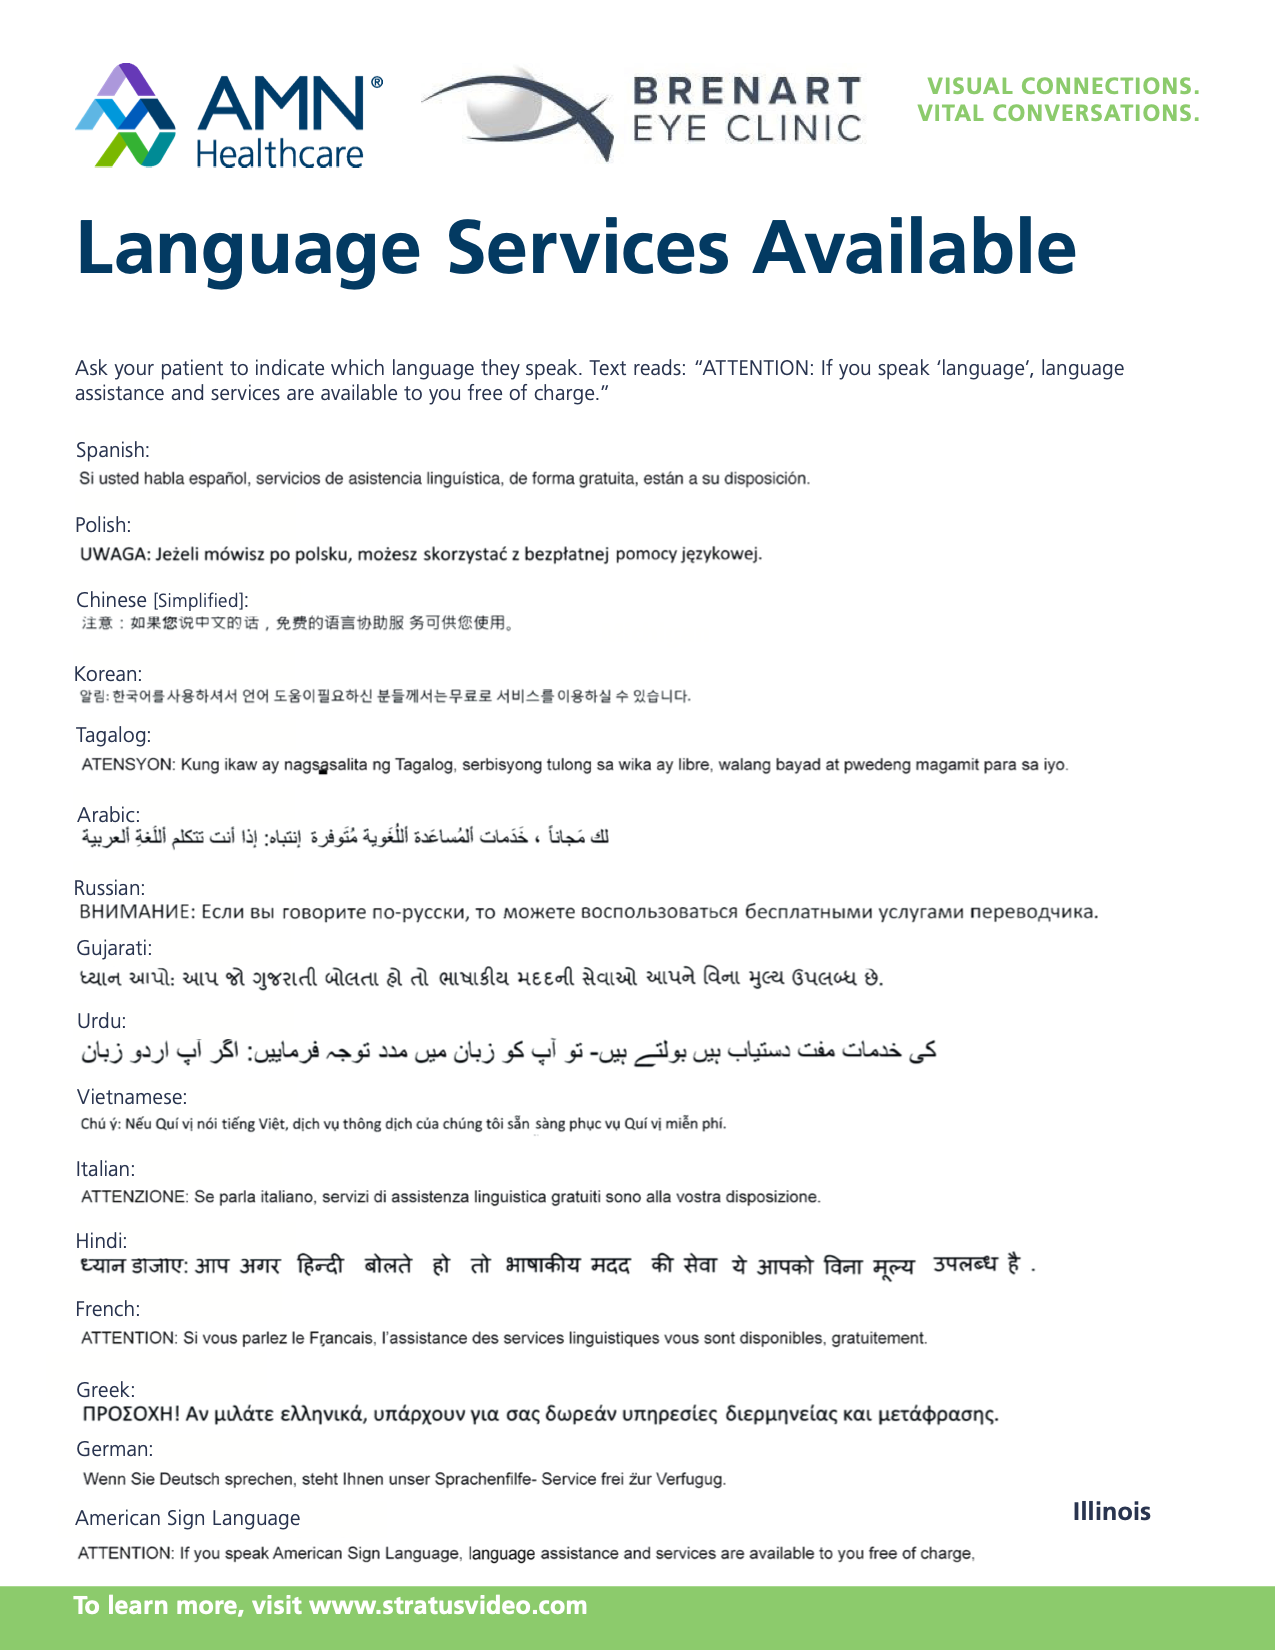 Available Language Services at Brenart Eye Clinic 